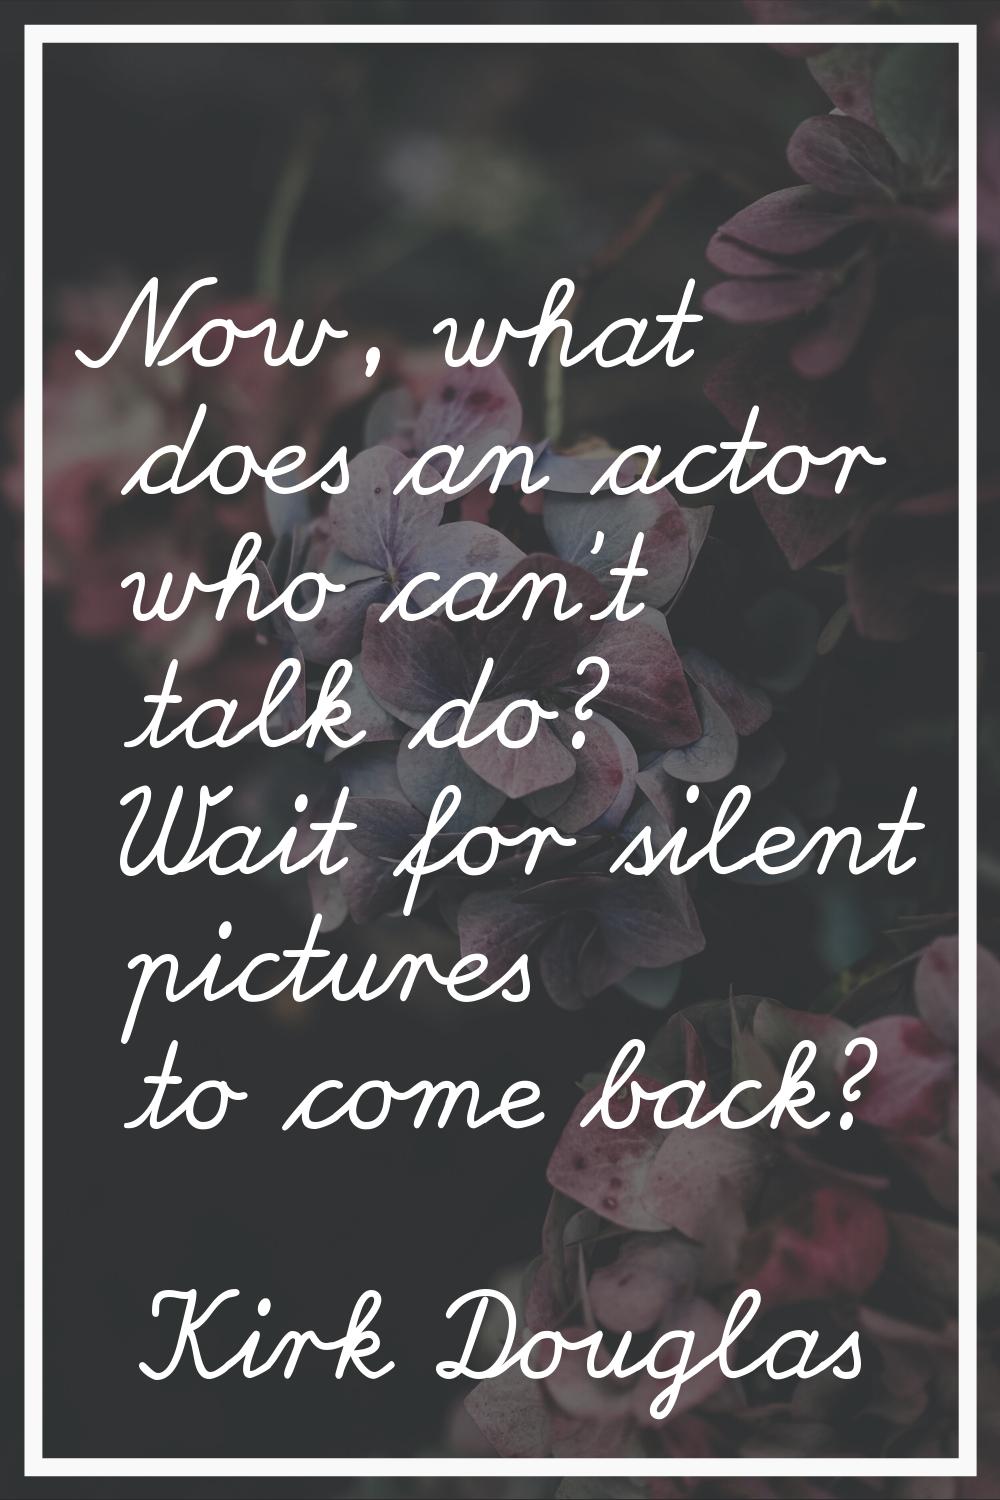 Now, what does an actor who can't talk do? Wait for silent pictures to come back?